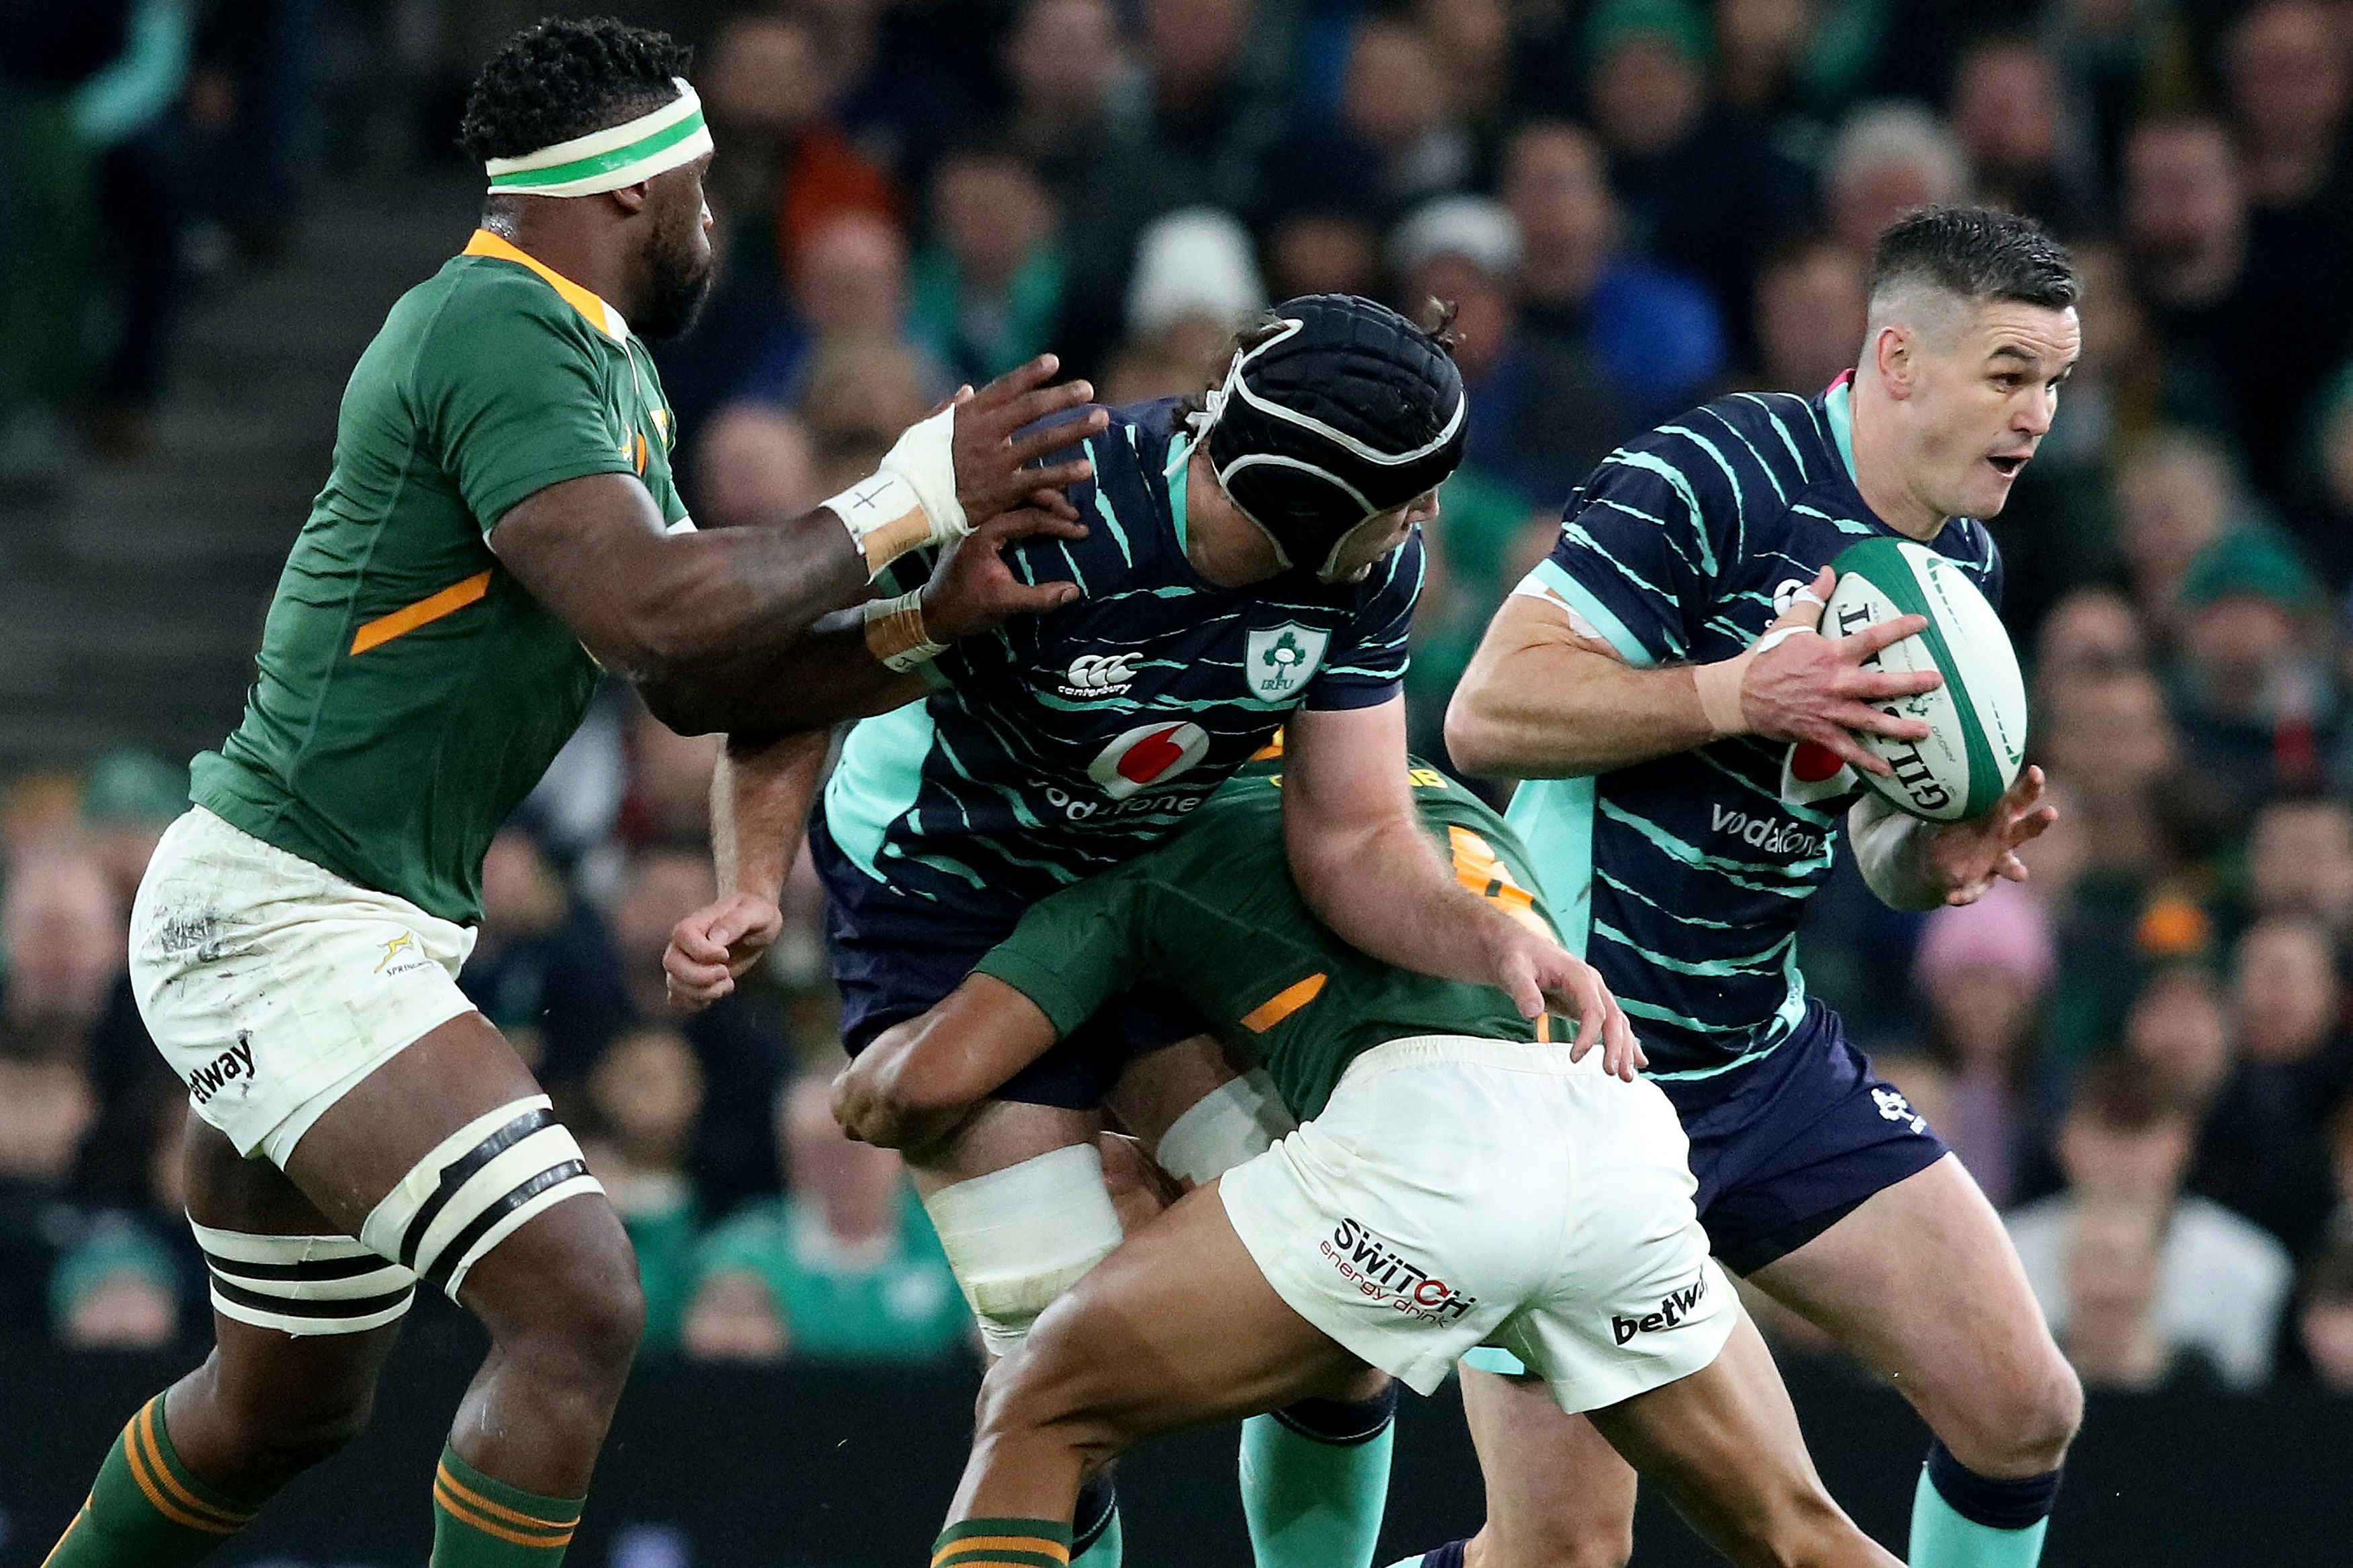 South Africa’s relentless defence meets Ireland’s intricate attack in a potential game of the tournament